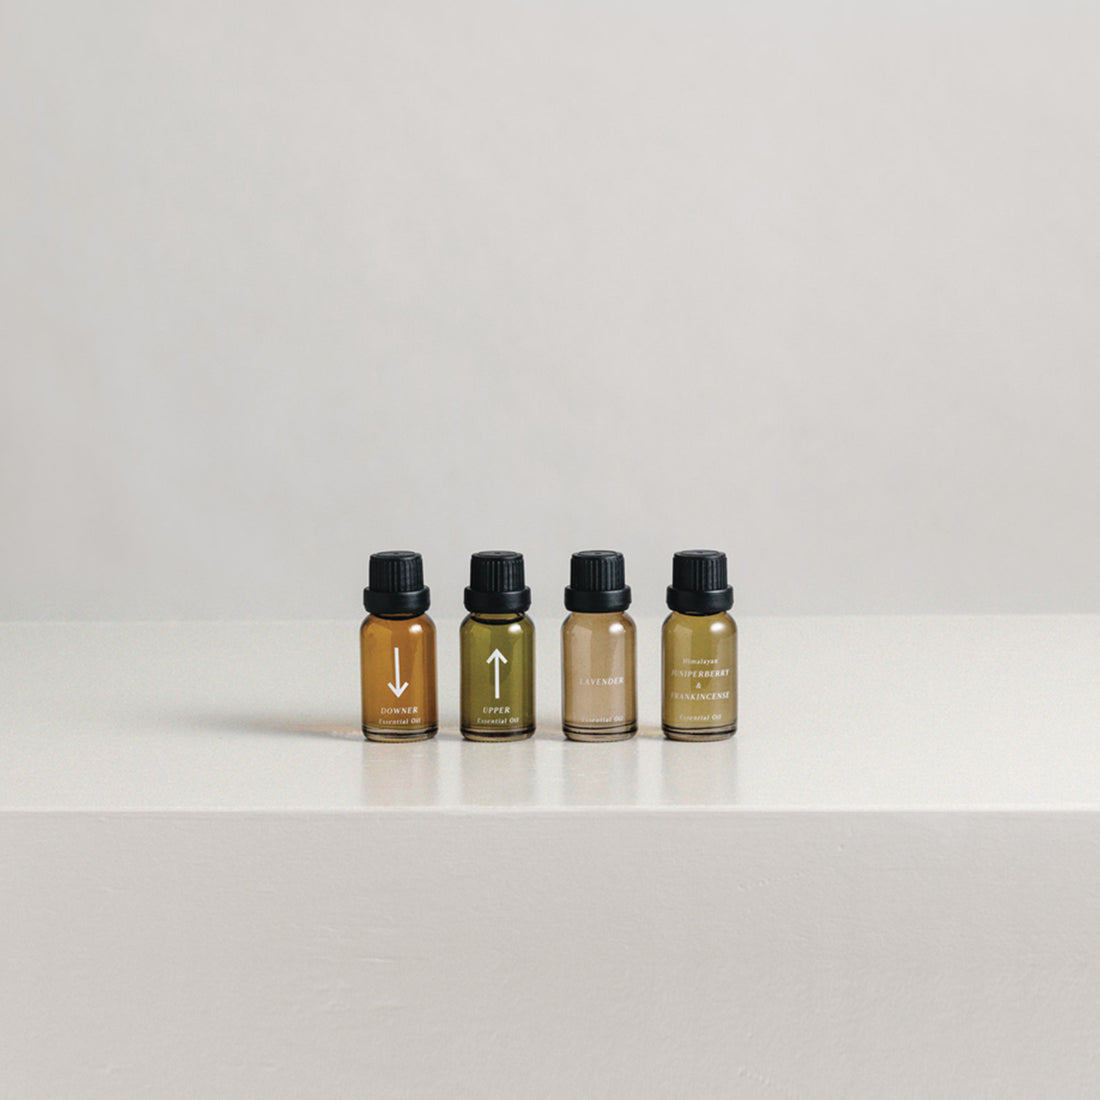 ESSENTIAL OIL BLENDS BY ADDITION STUDIO